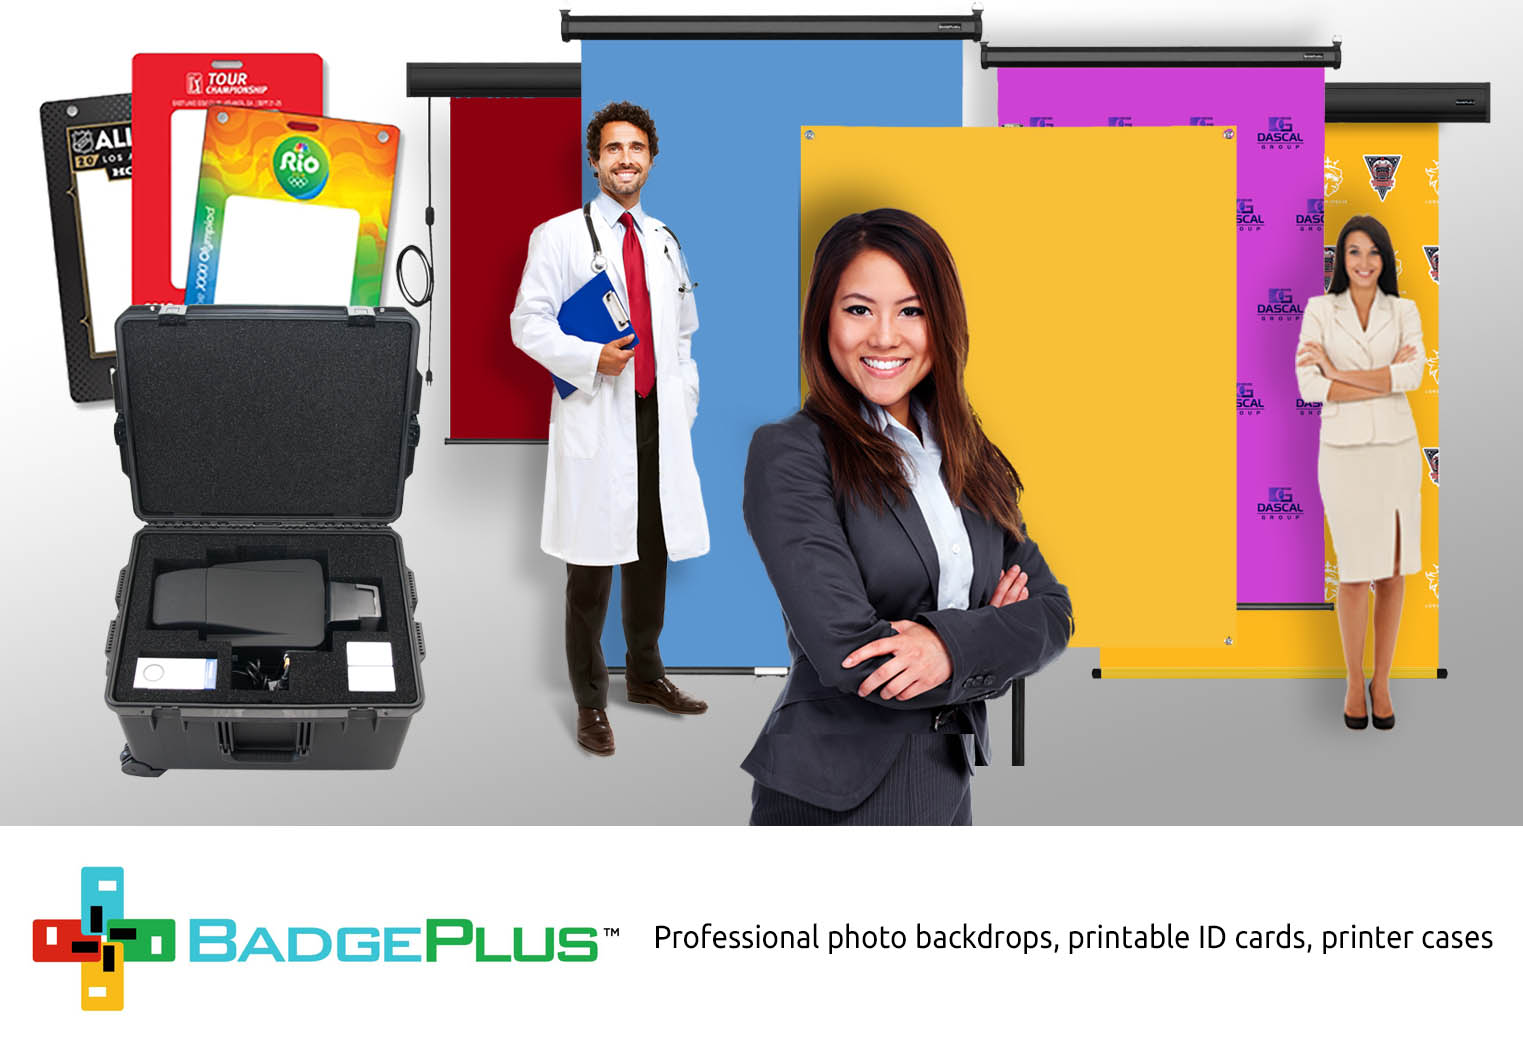 BadgePlus has Professional photo backdrops, printable ID cards, printer cases.